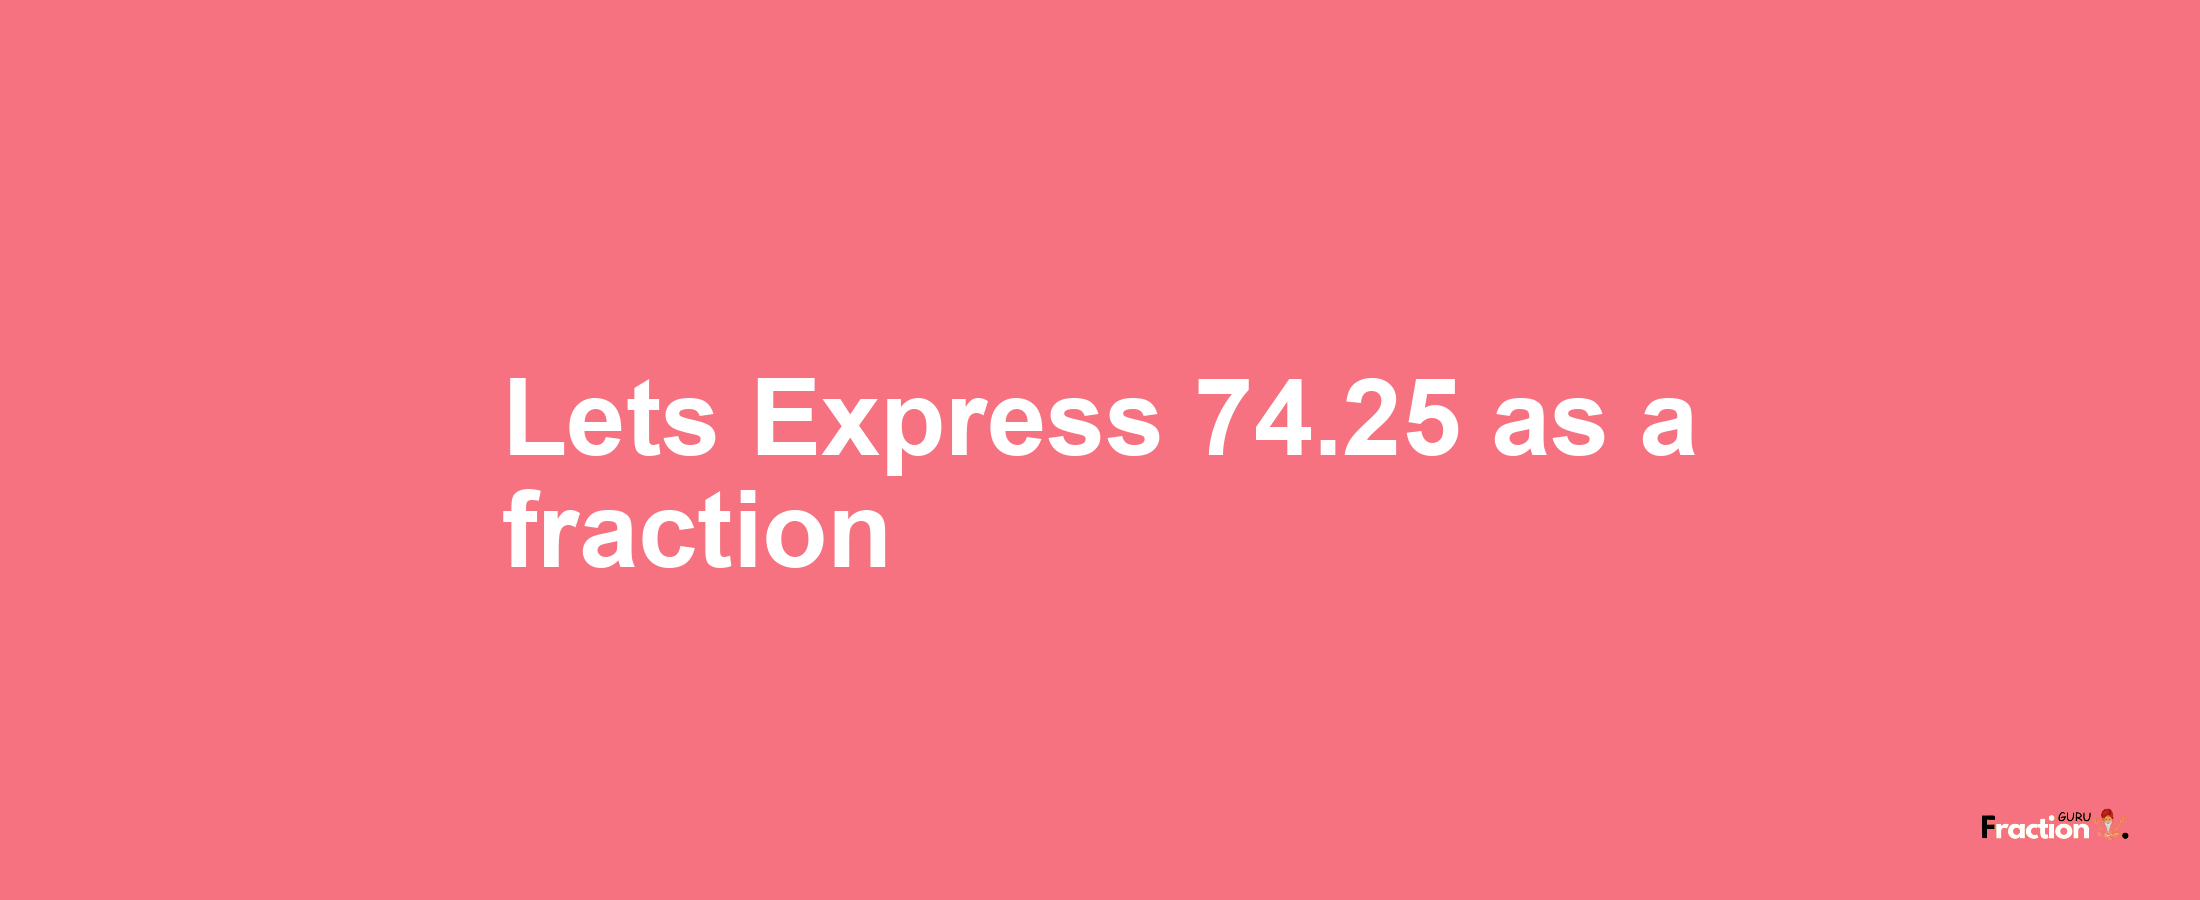 Lets Express 74.25 as afraction